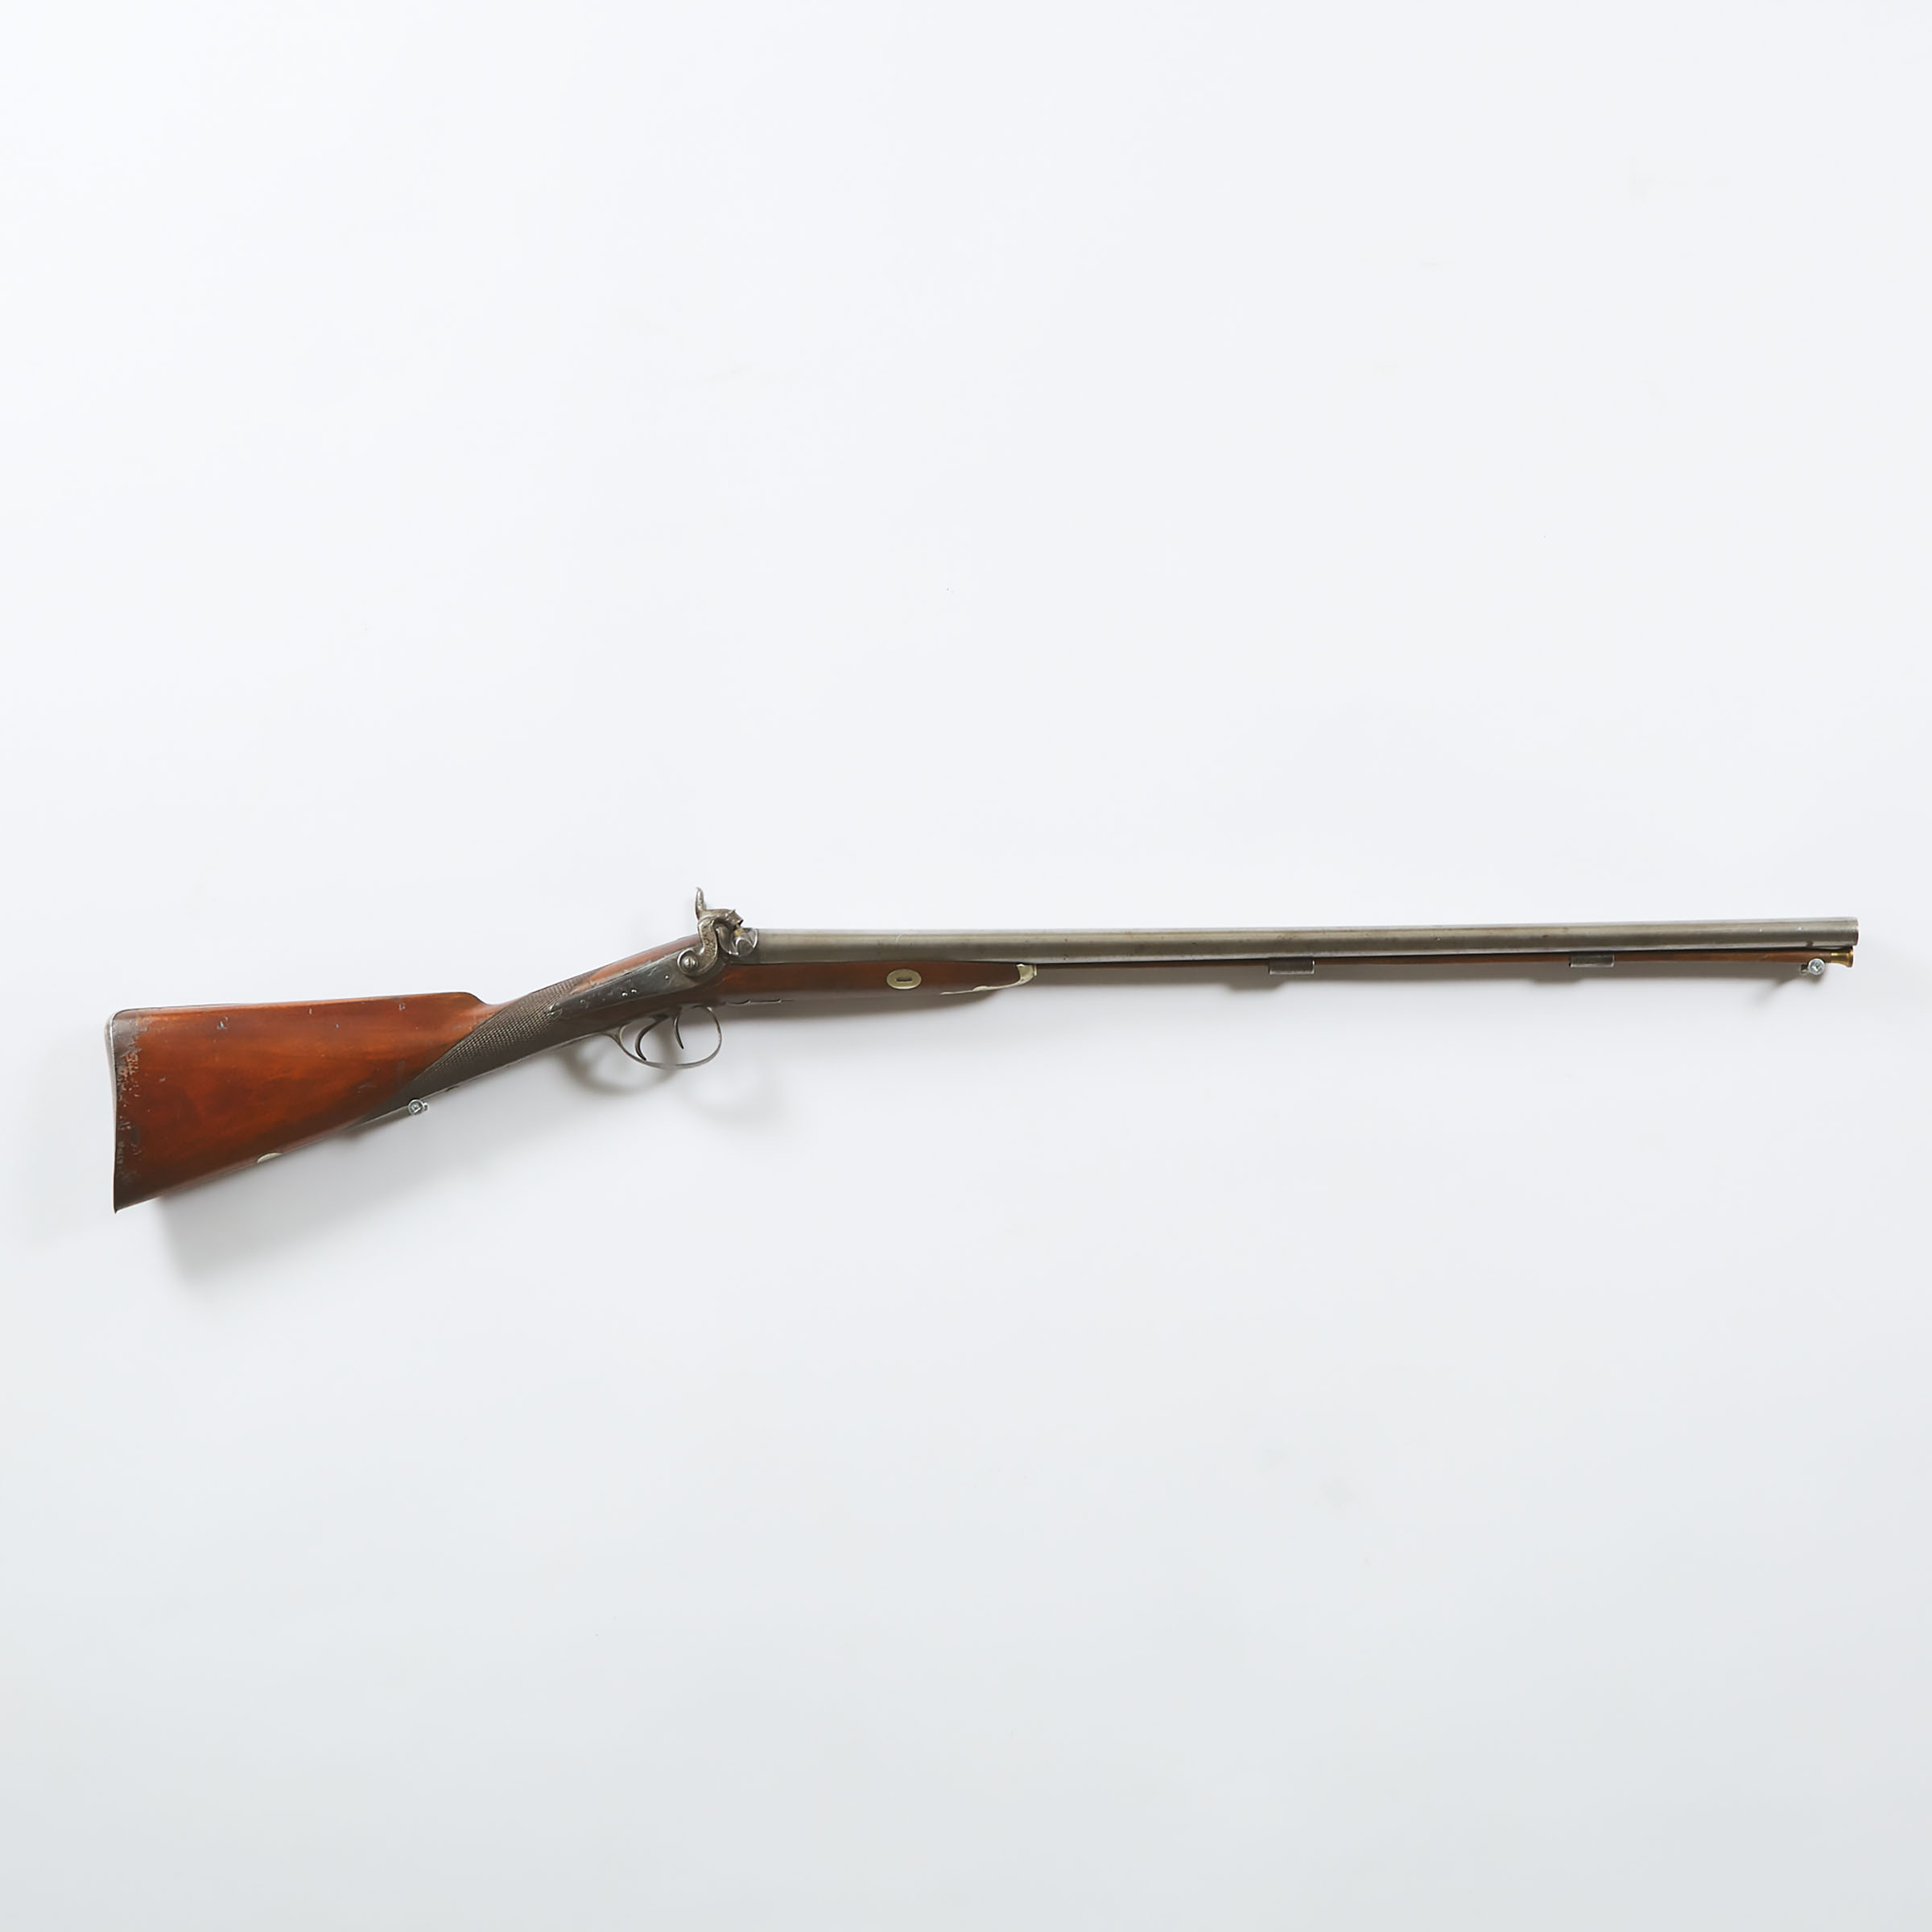 Large Bore Percussion Cap Double Fowling Gun by Egg of London, 19th century